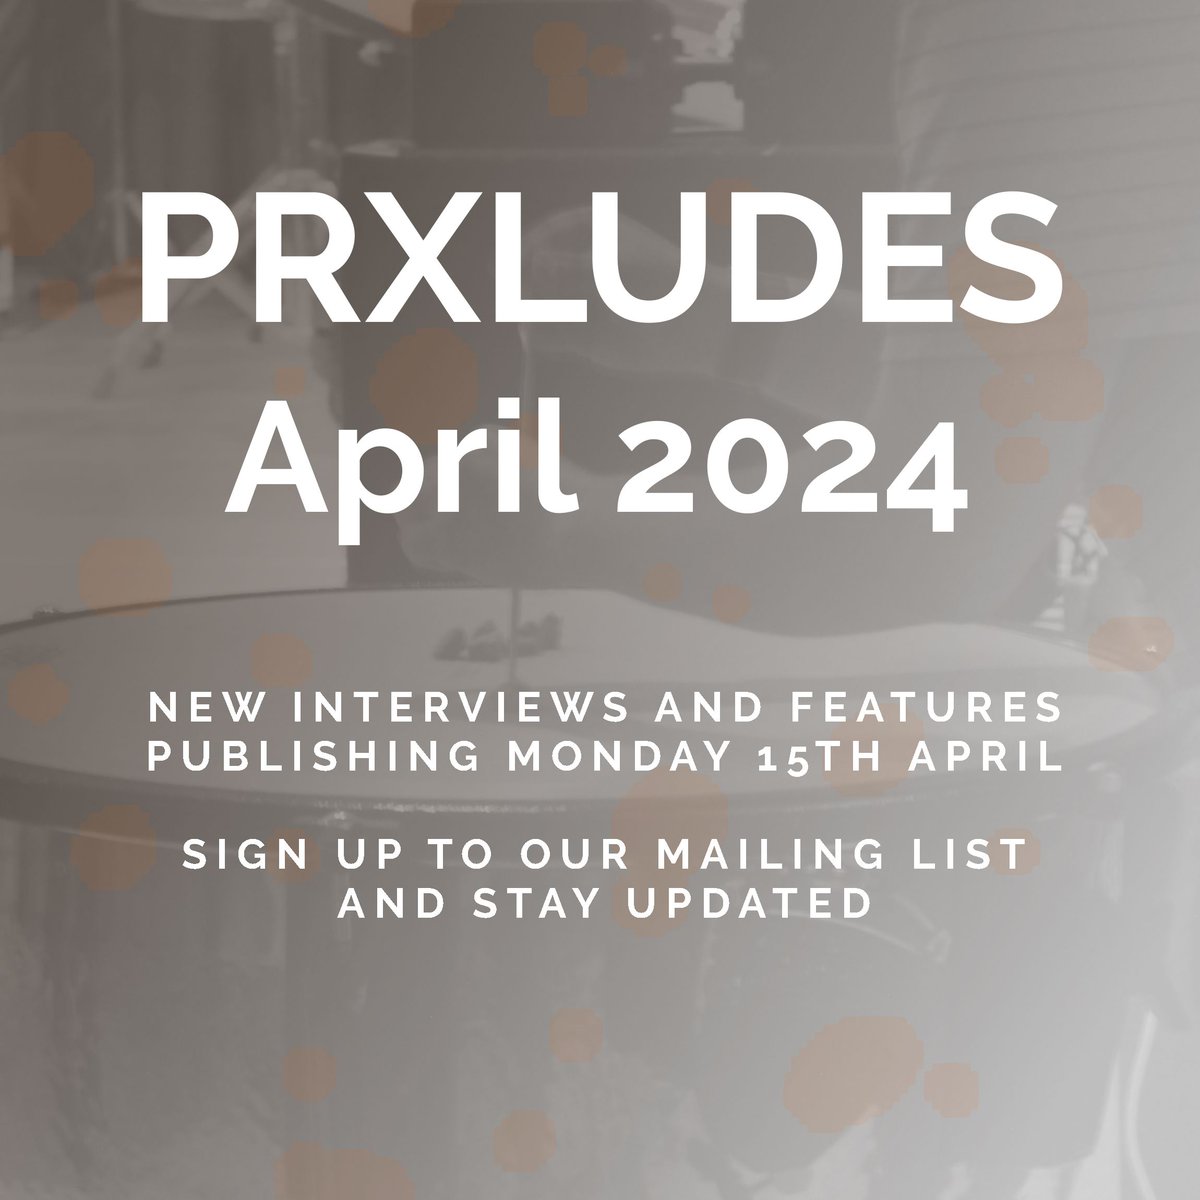 Our April issue publishes this Monday 15th! Sign up to our mailing list and don't miss out ⚡ ⚡ ⚡ buff.ly/4aHAsPS